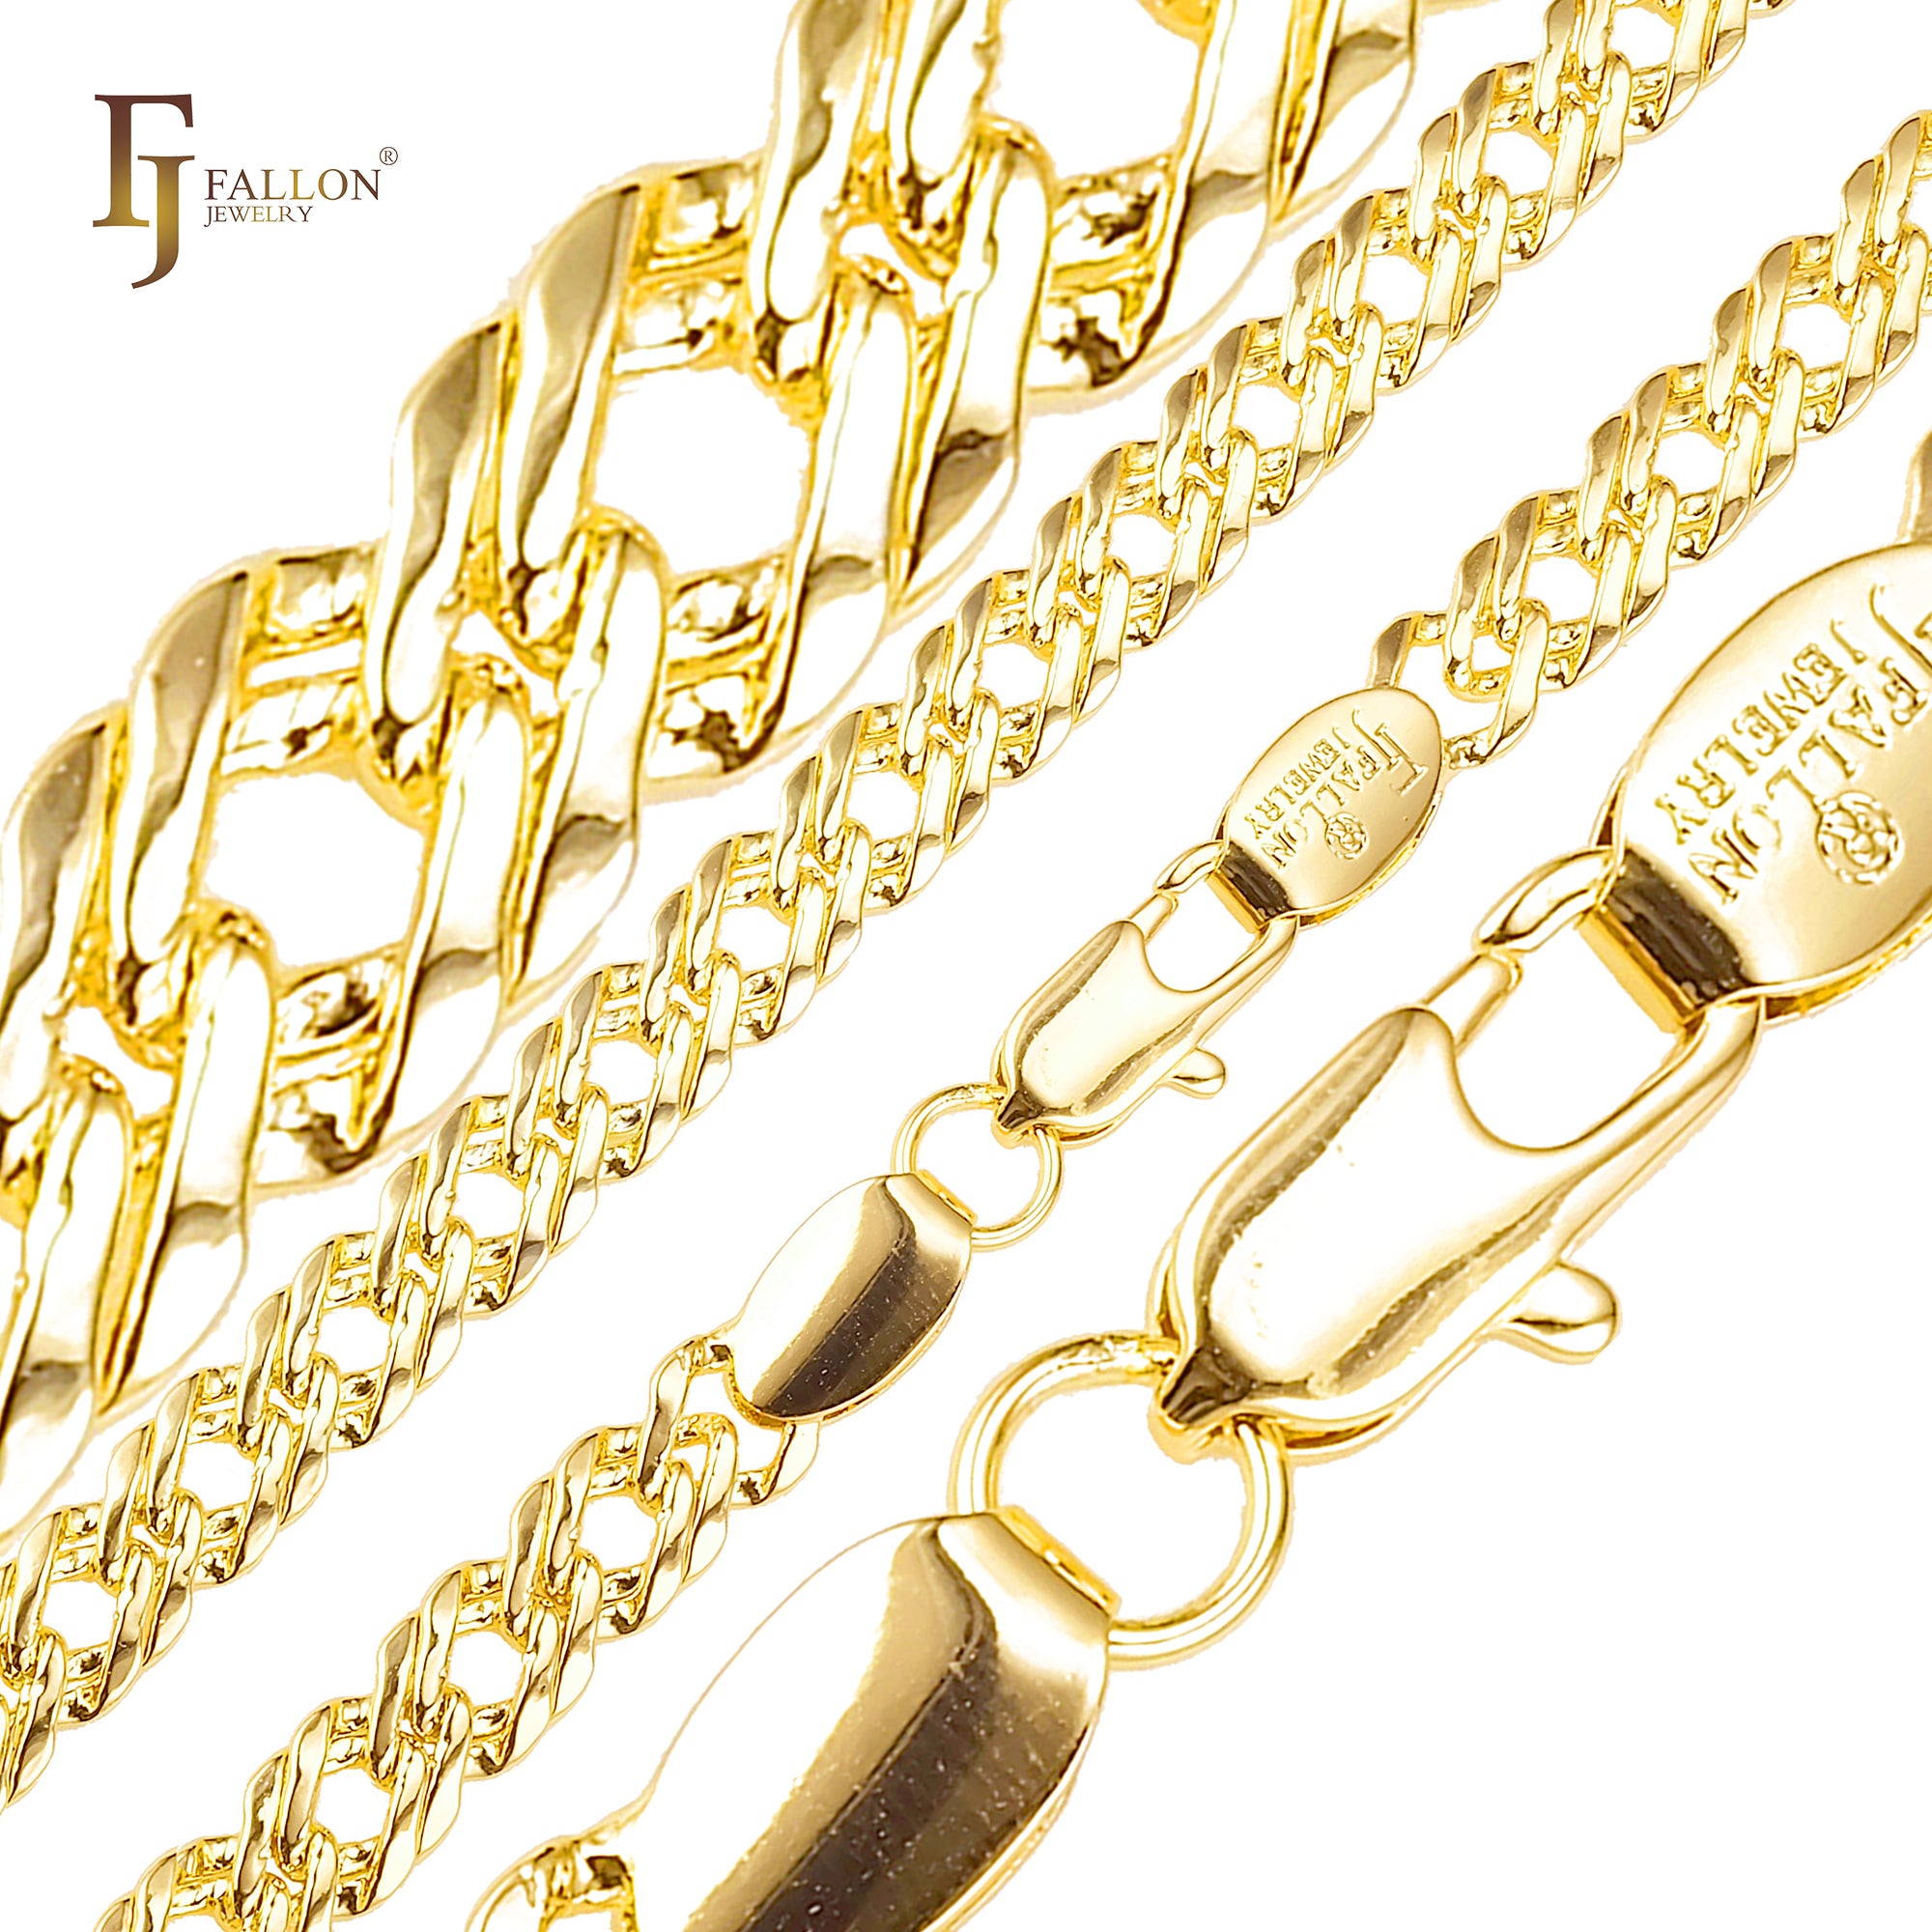 .Classic Rombo link 14K Gold, 18K Gold chains